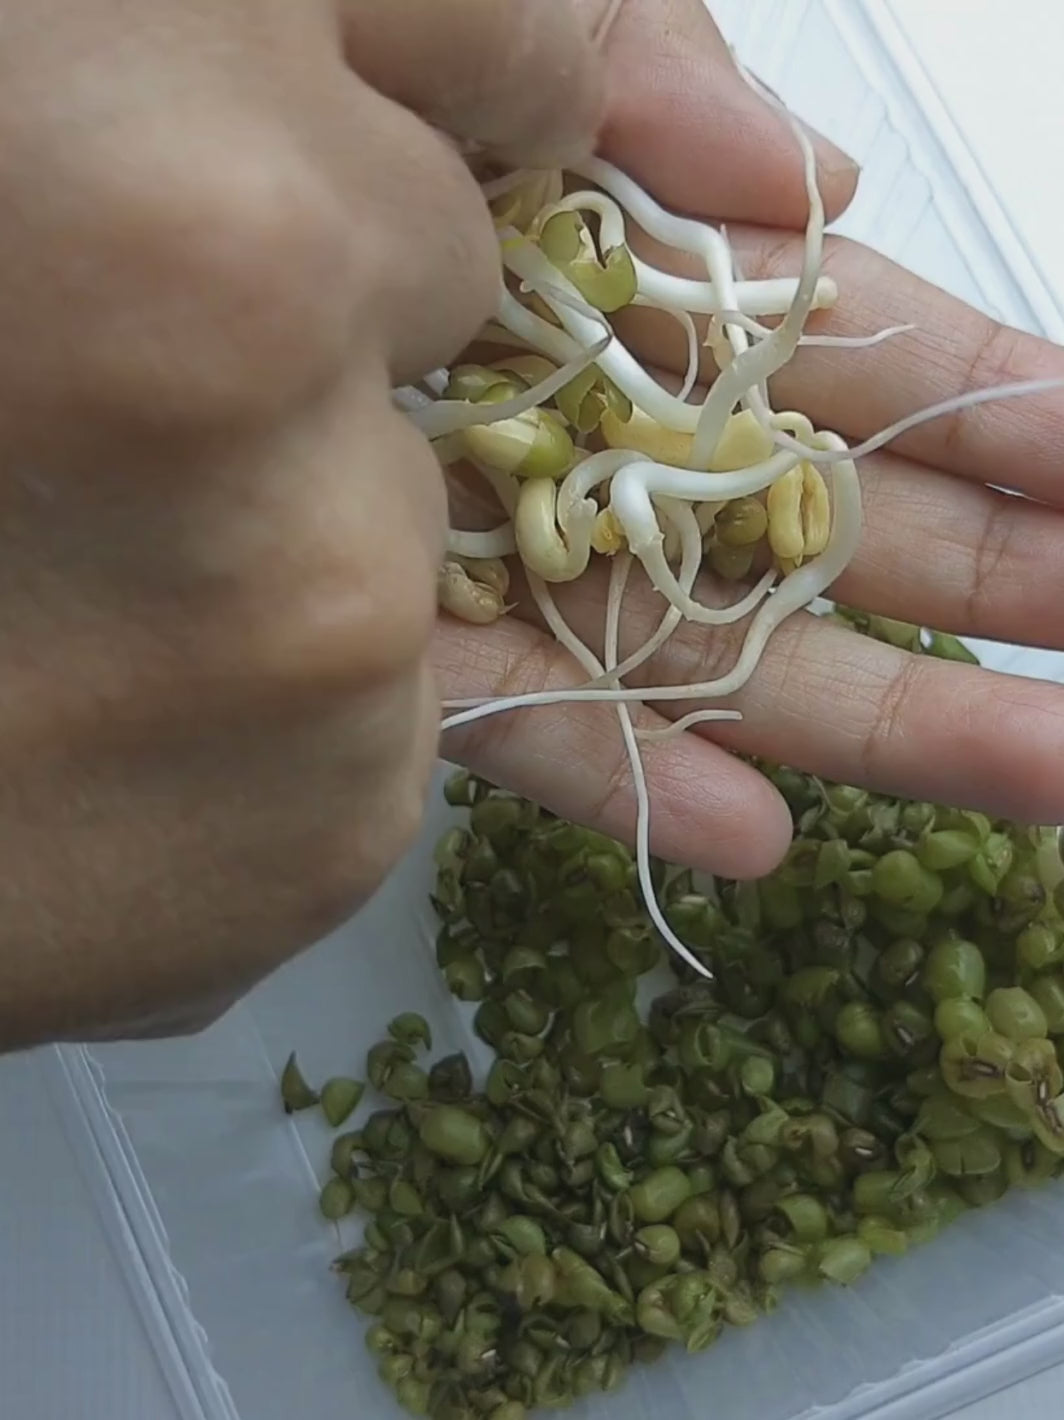 Handy Pantry Organic Mung Bean Sprouting Seeds Hull Cleanup Video